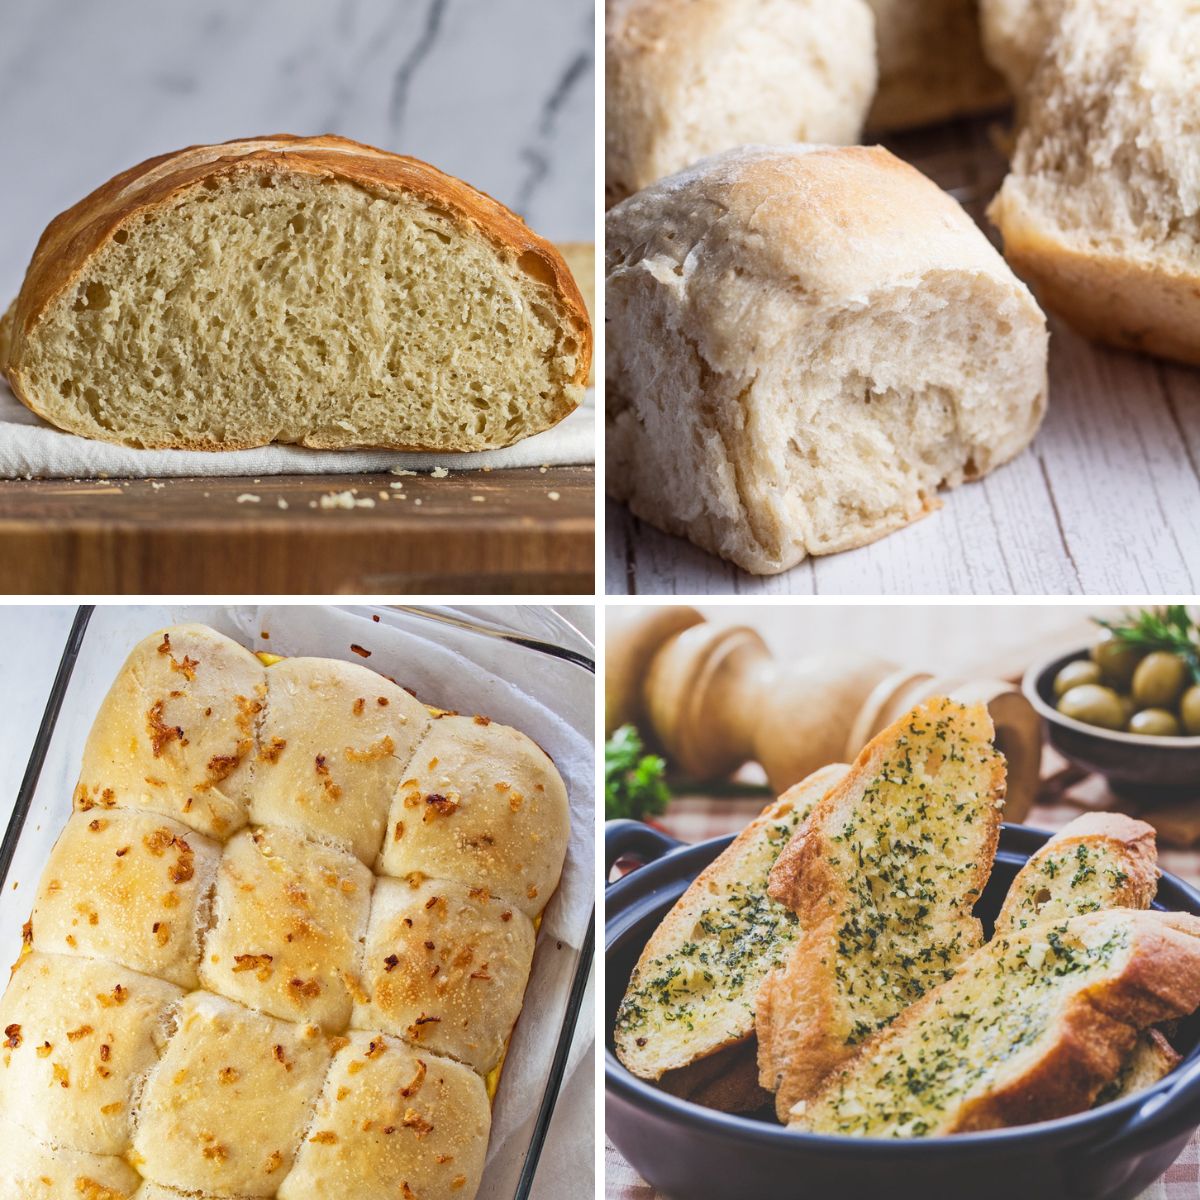 Best Thanksgiving dinner rolls and bread recipes to bake and share with your holiday meals.